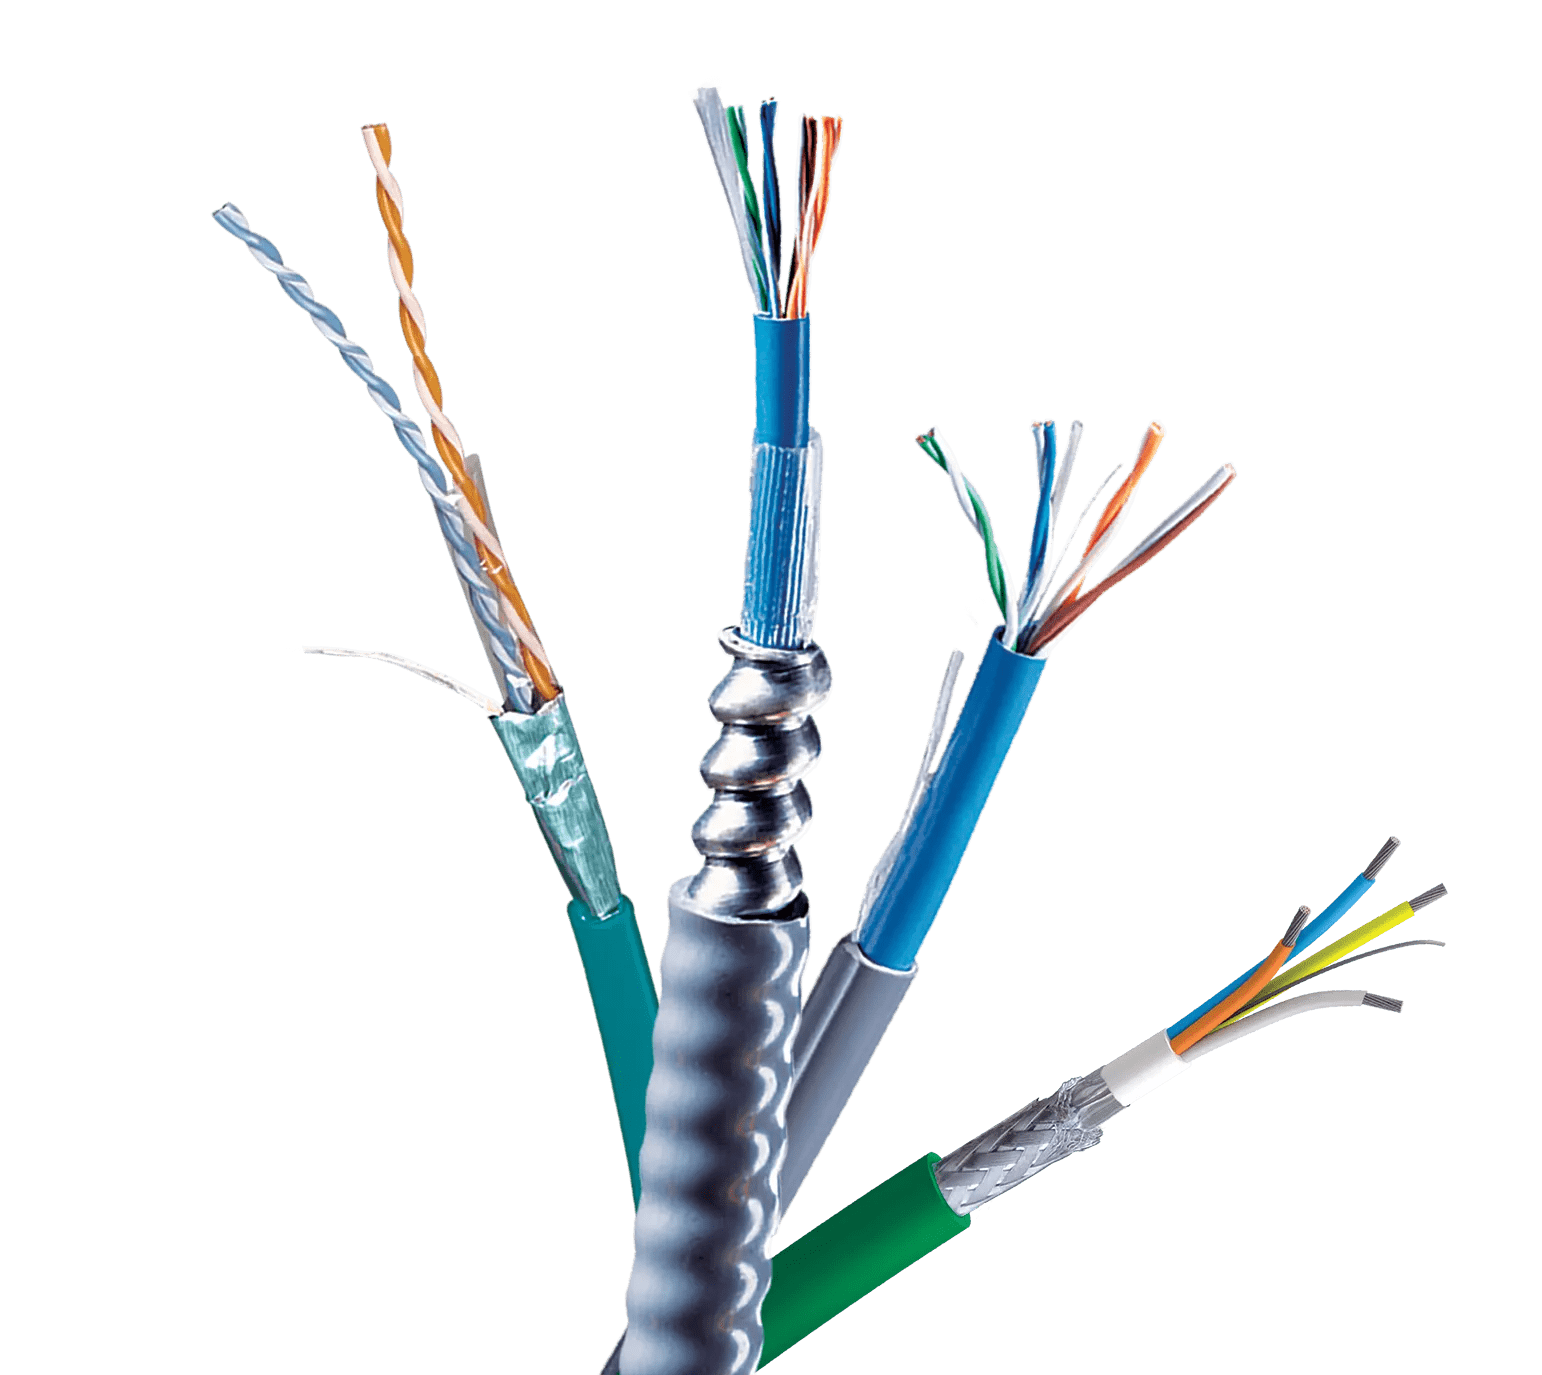 Categories of Ethernet LAN Cables in History